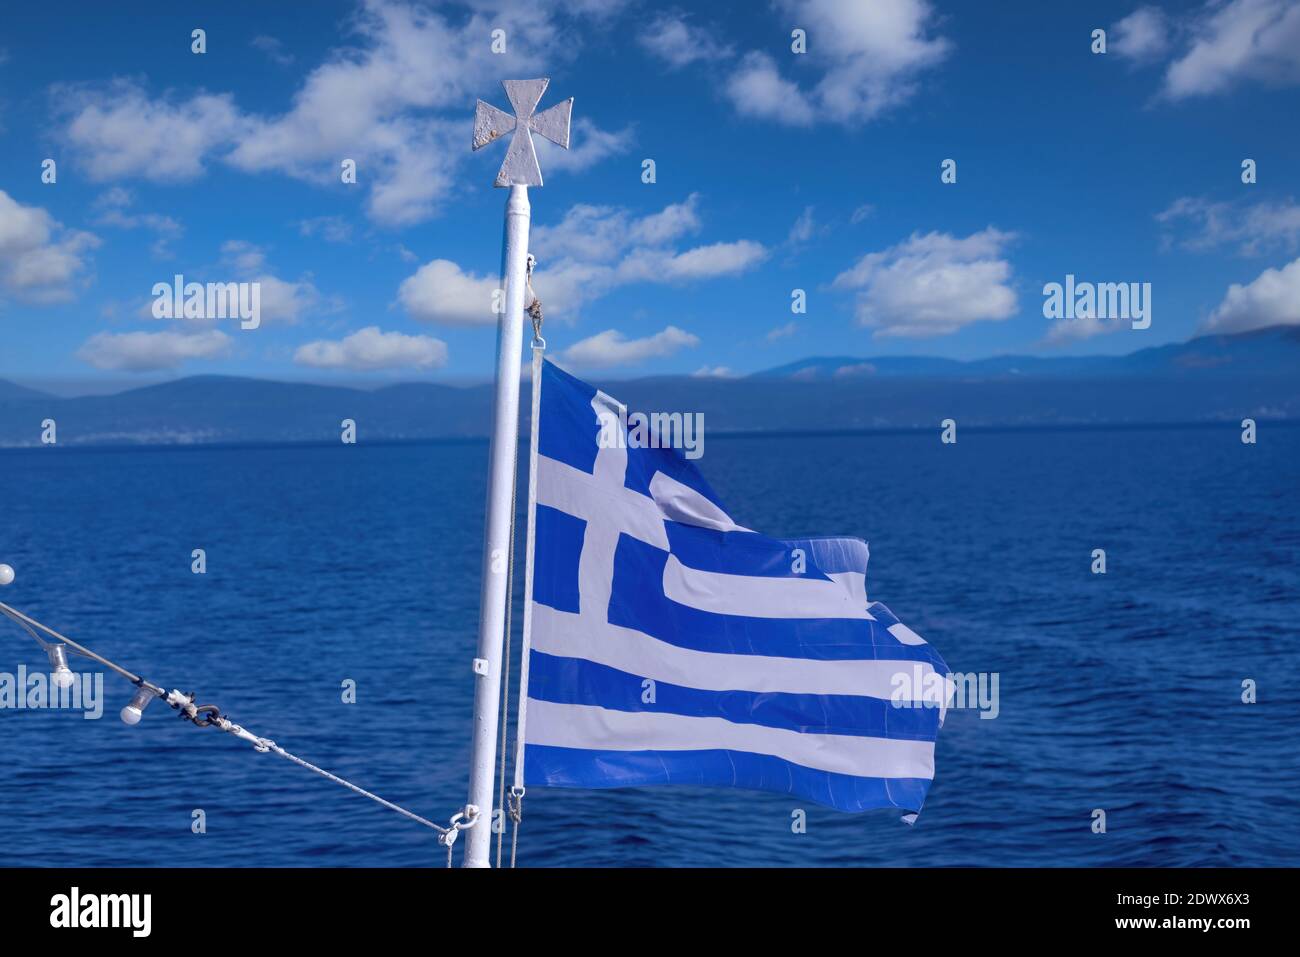 Greece, the flag of Greece is waving on a ship. Stock Photo